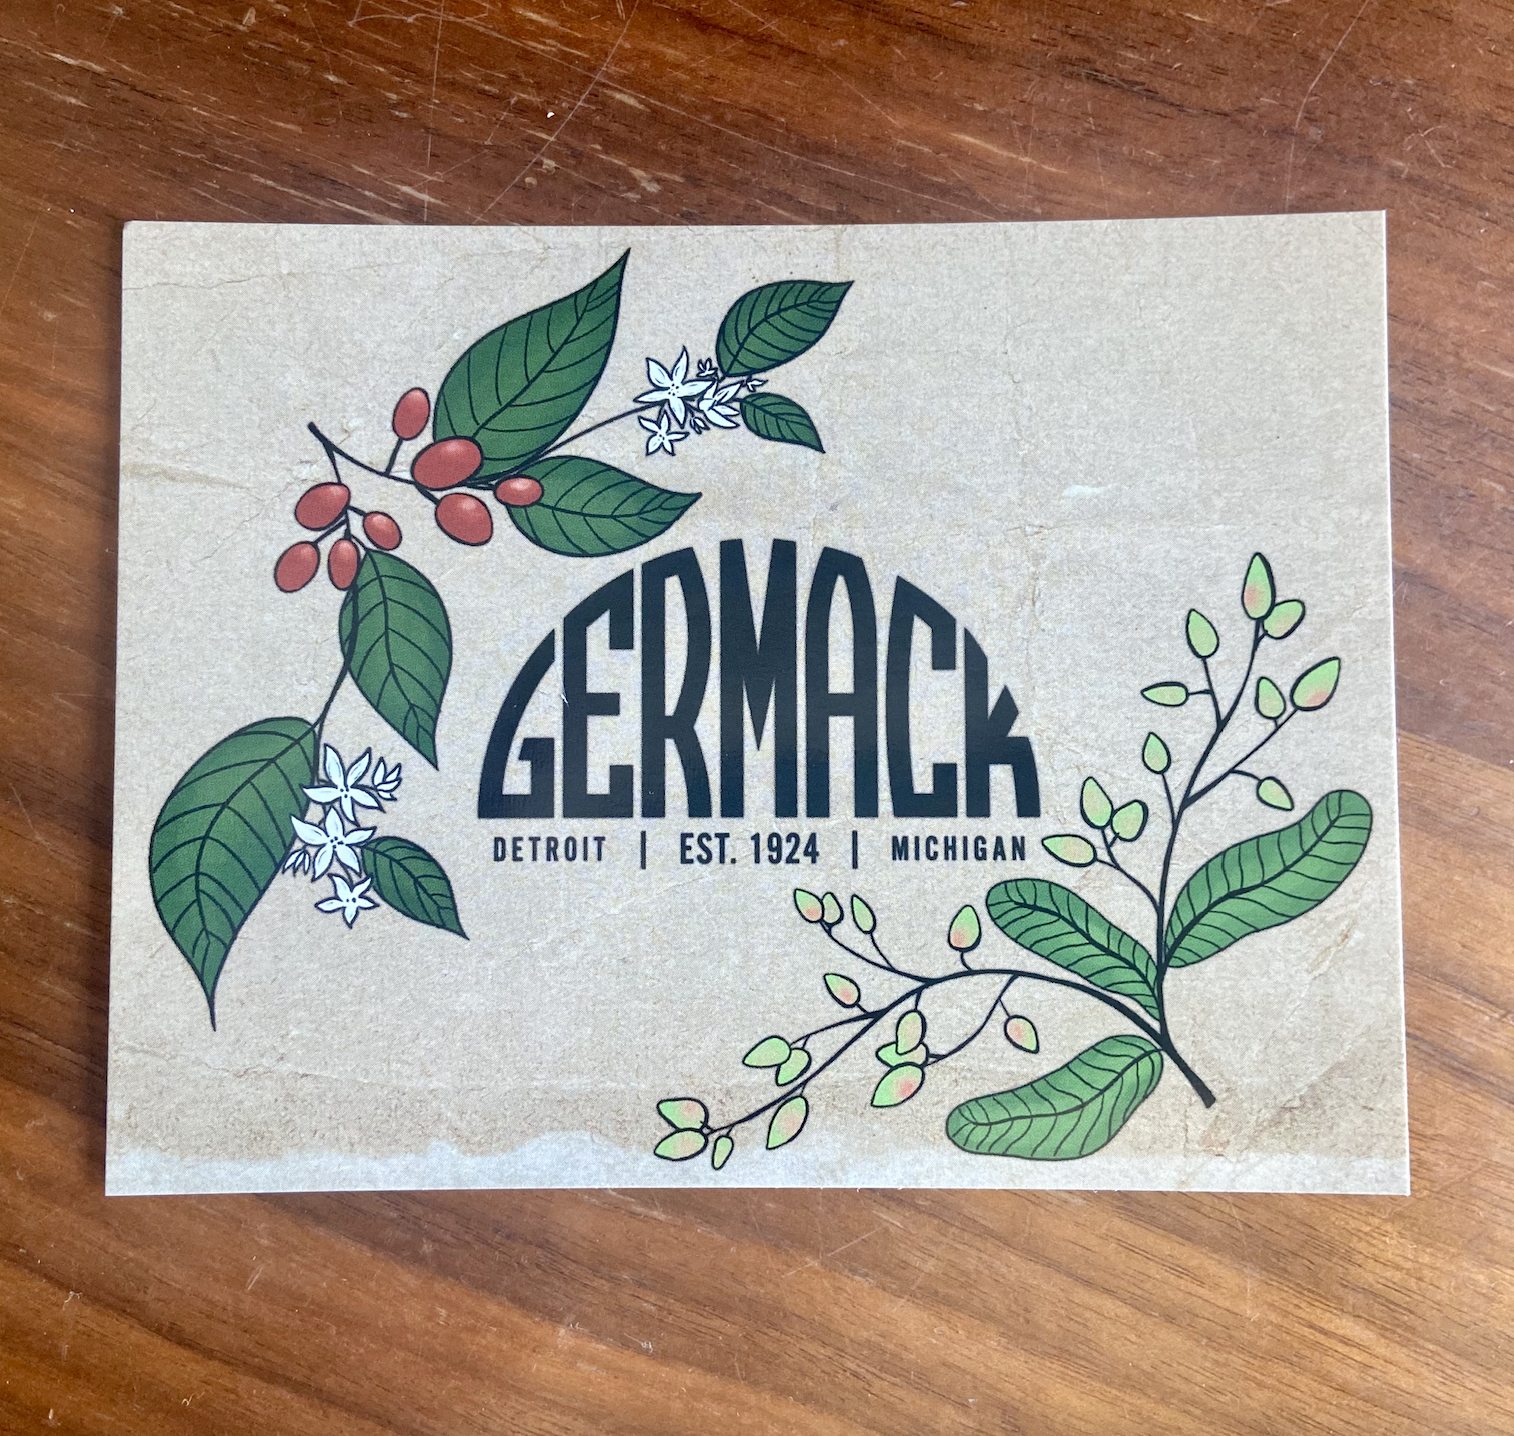 Picture Germack Card